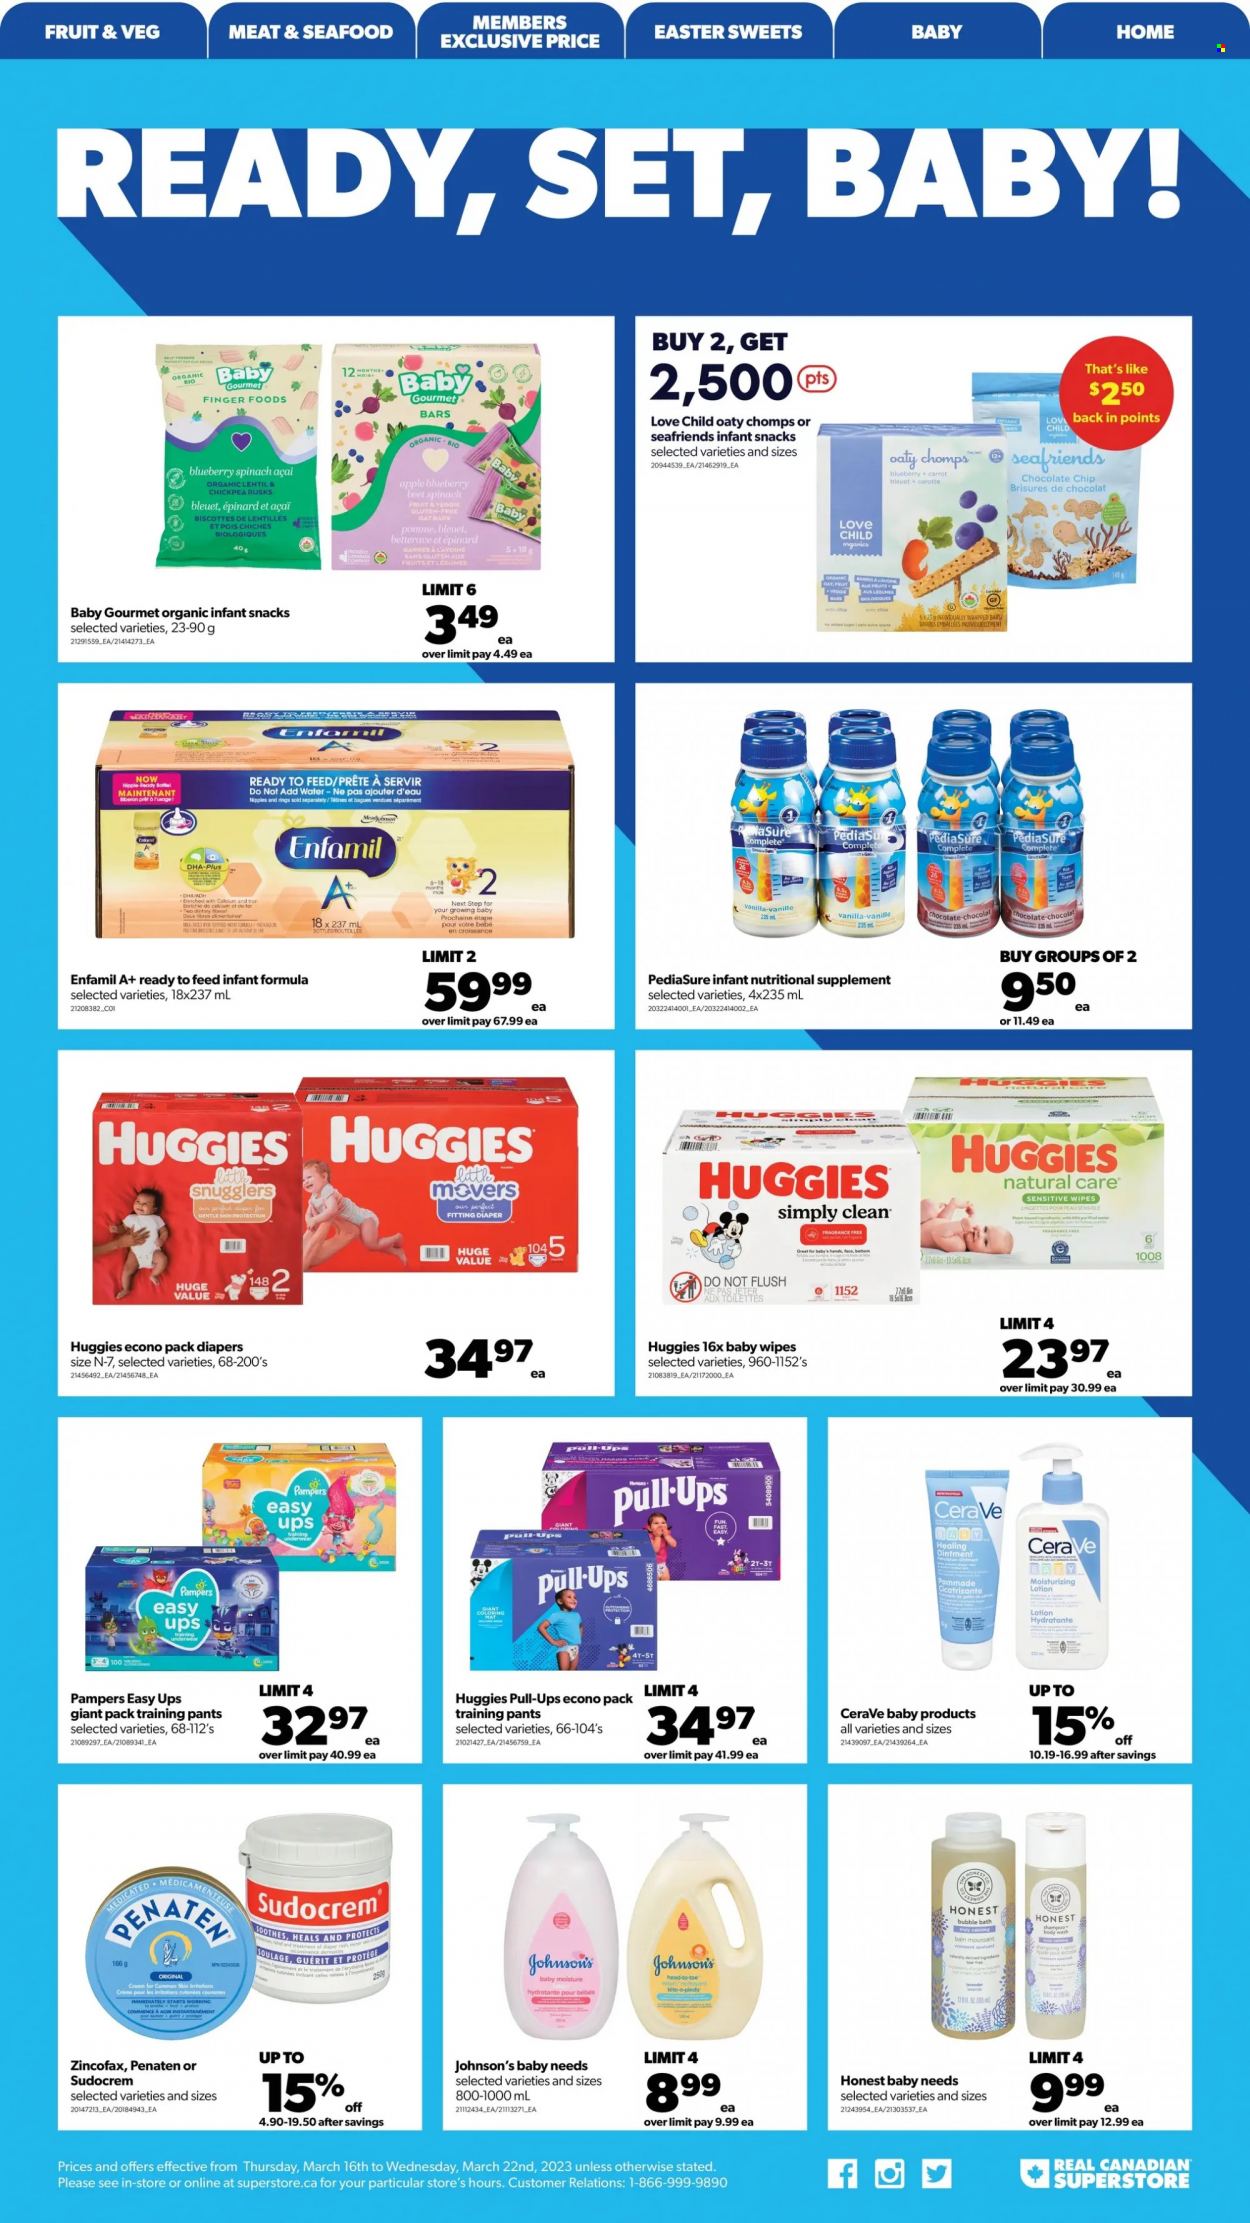 thumbnail - Real Canadian Superstore Flyer - March 16, 2023 - March 22, 2023 - Sales products - spinach, oranges, seafood, chocolate chips, snack, water, Enfamil, wipes, Pampers, pants, baby wipes, nappies, Johnson's, baby pants, CeraVe, body lotion, nutritional supplement, Sudocrem, Huggies. Page 15.